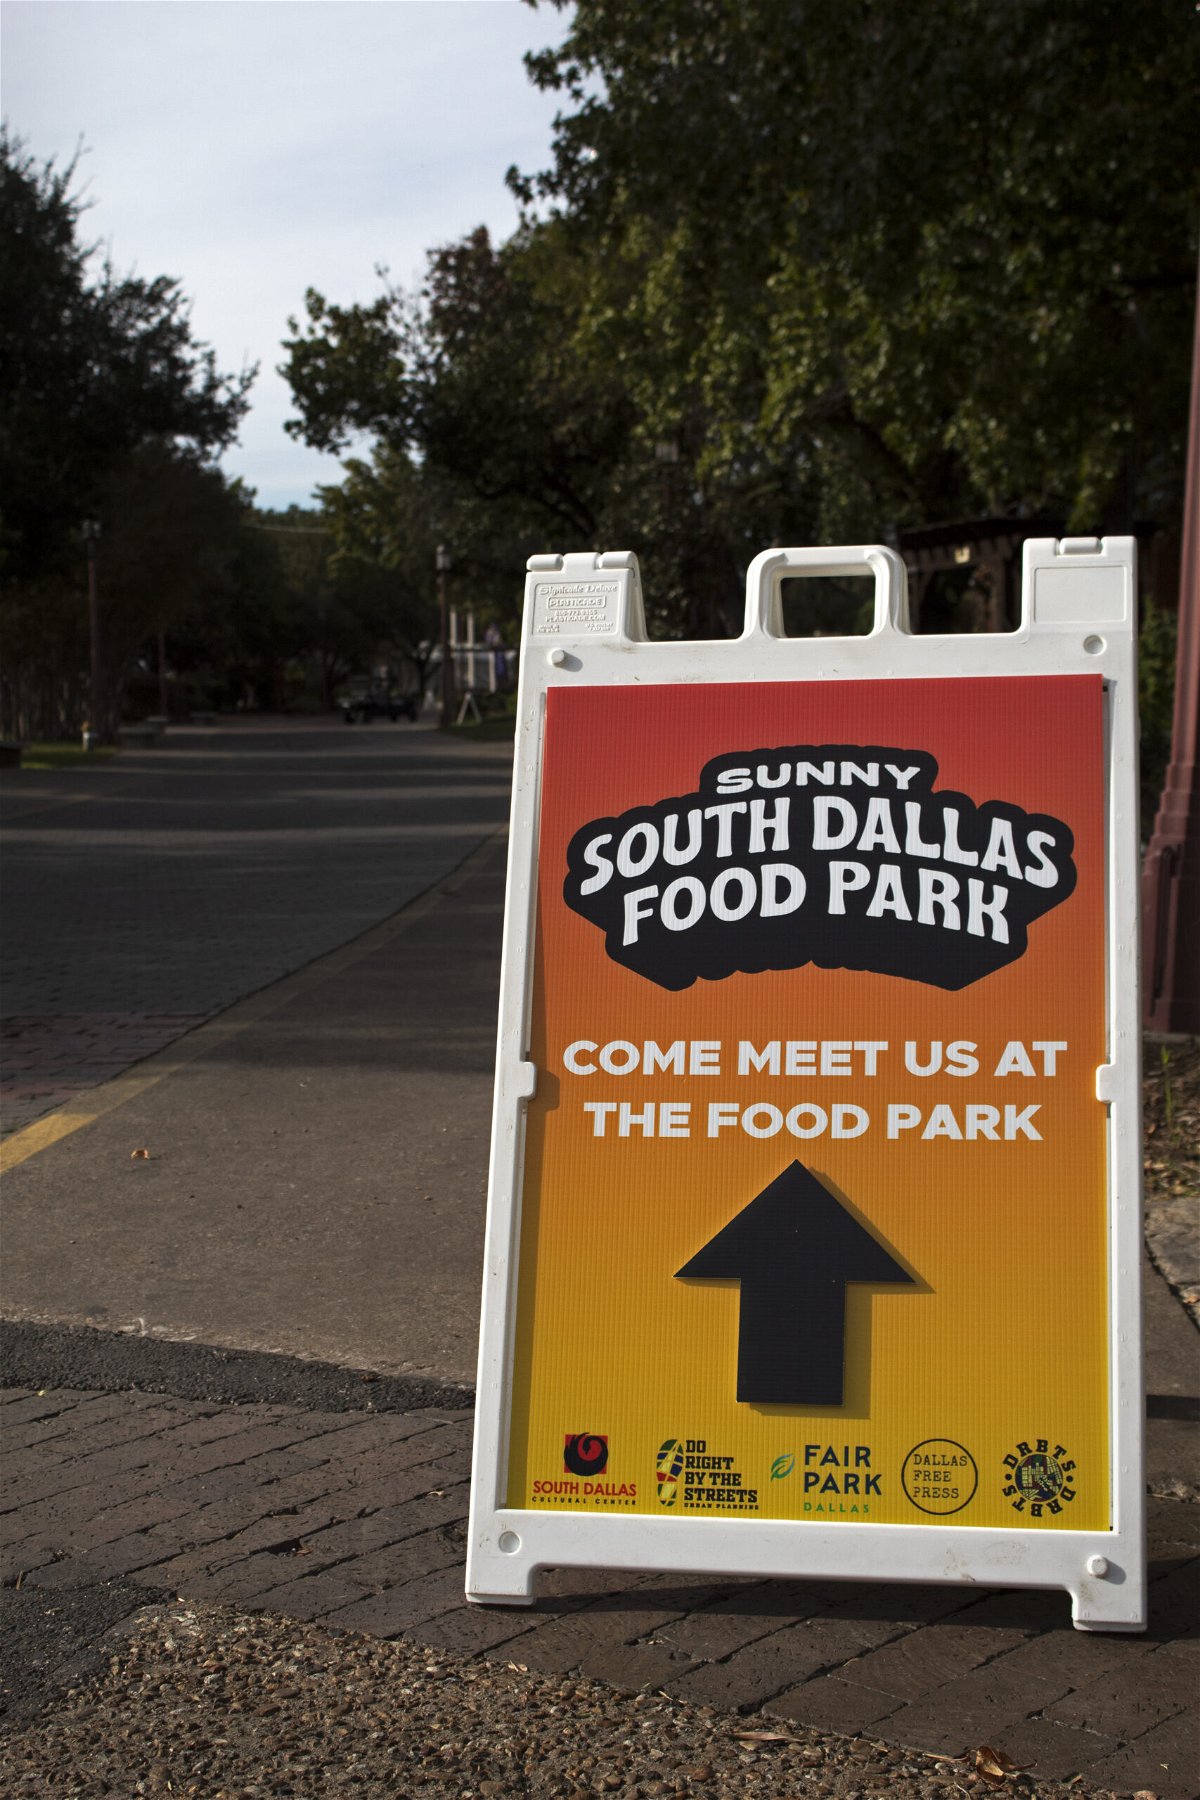 <strong>Fair Park First hopes partnering with Sunny South Dallas Food Park will create a welcoming space for Black neighbors</strong>